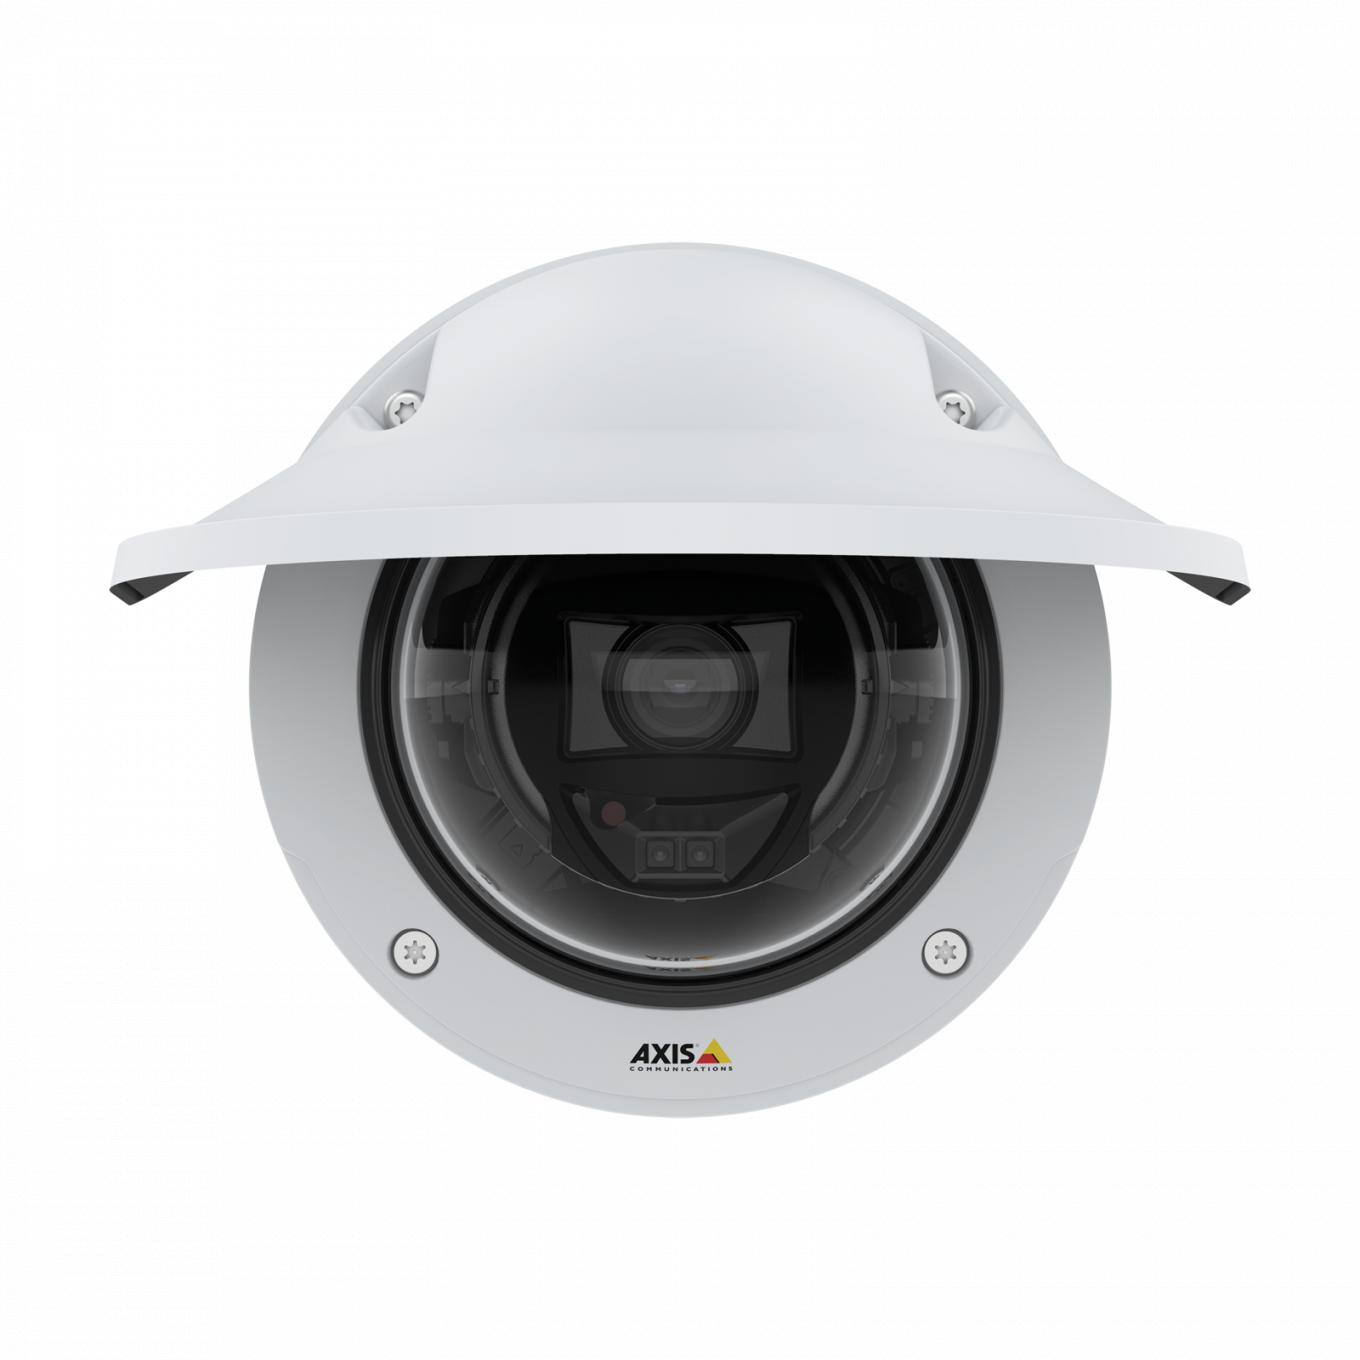 AXIS P3255-LVE Dome Camera, viewed from its front